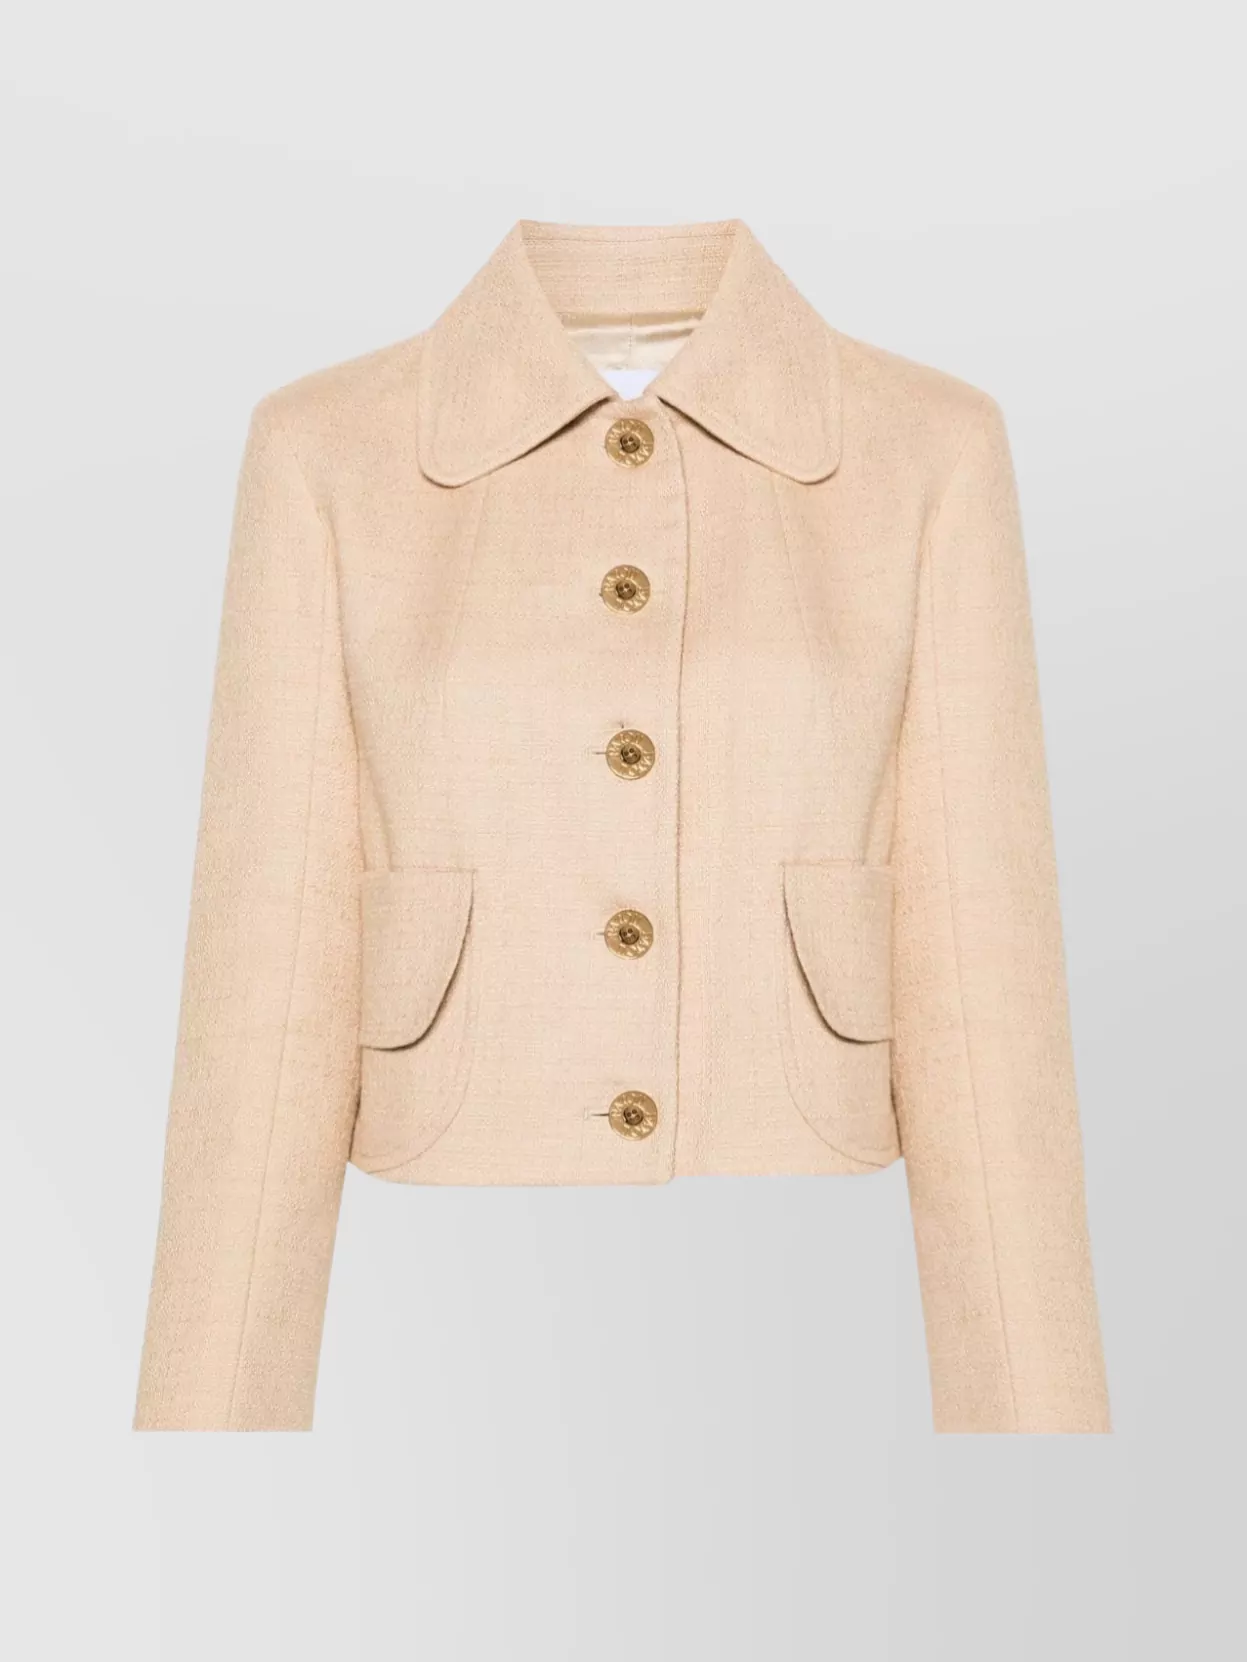 Patou Iconic Tweed Jacket In Neutrals